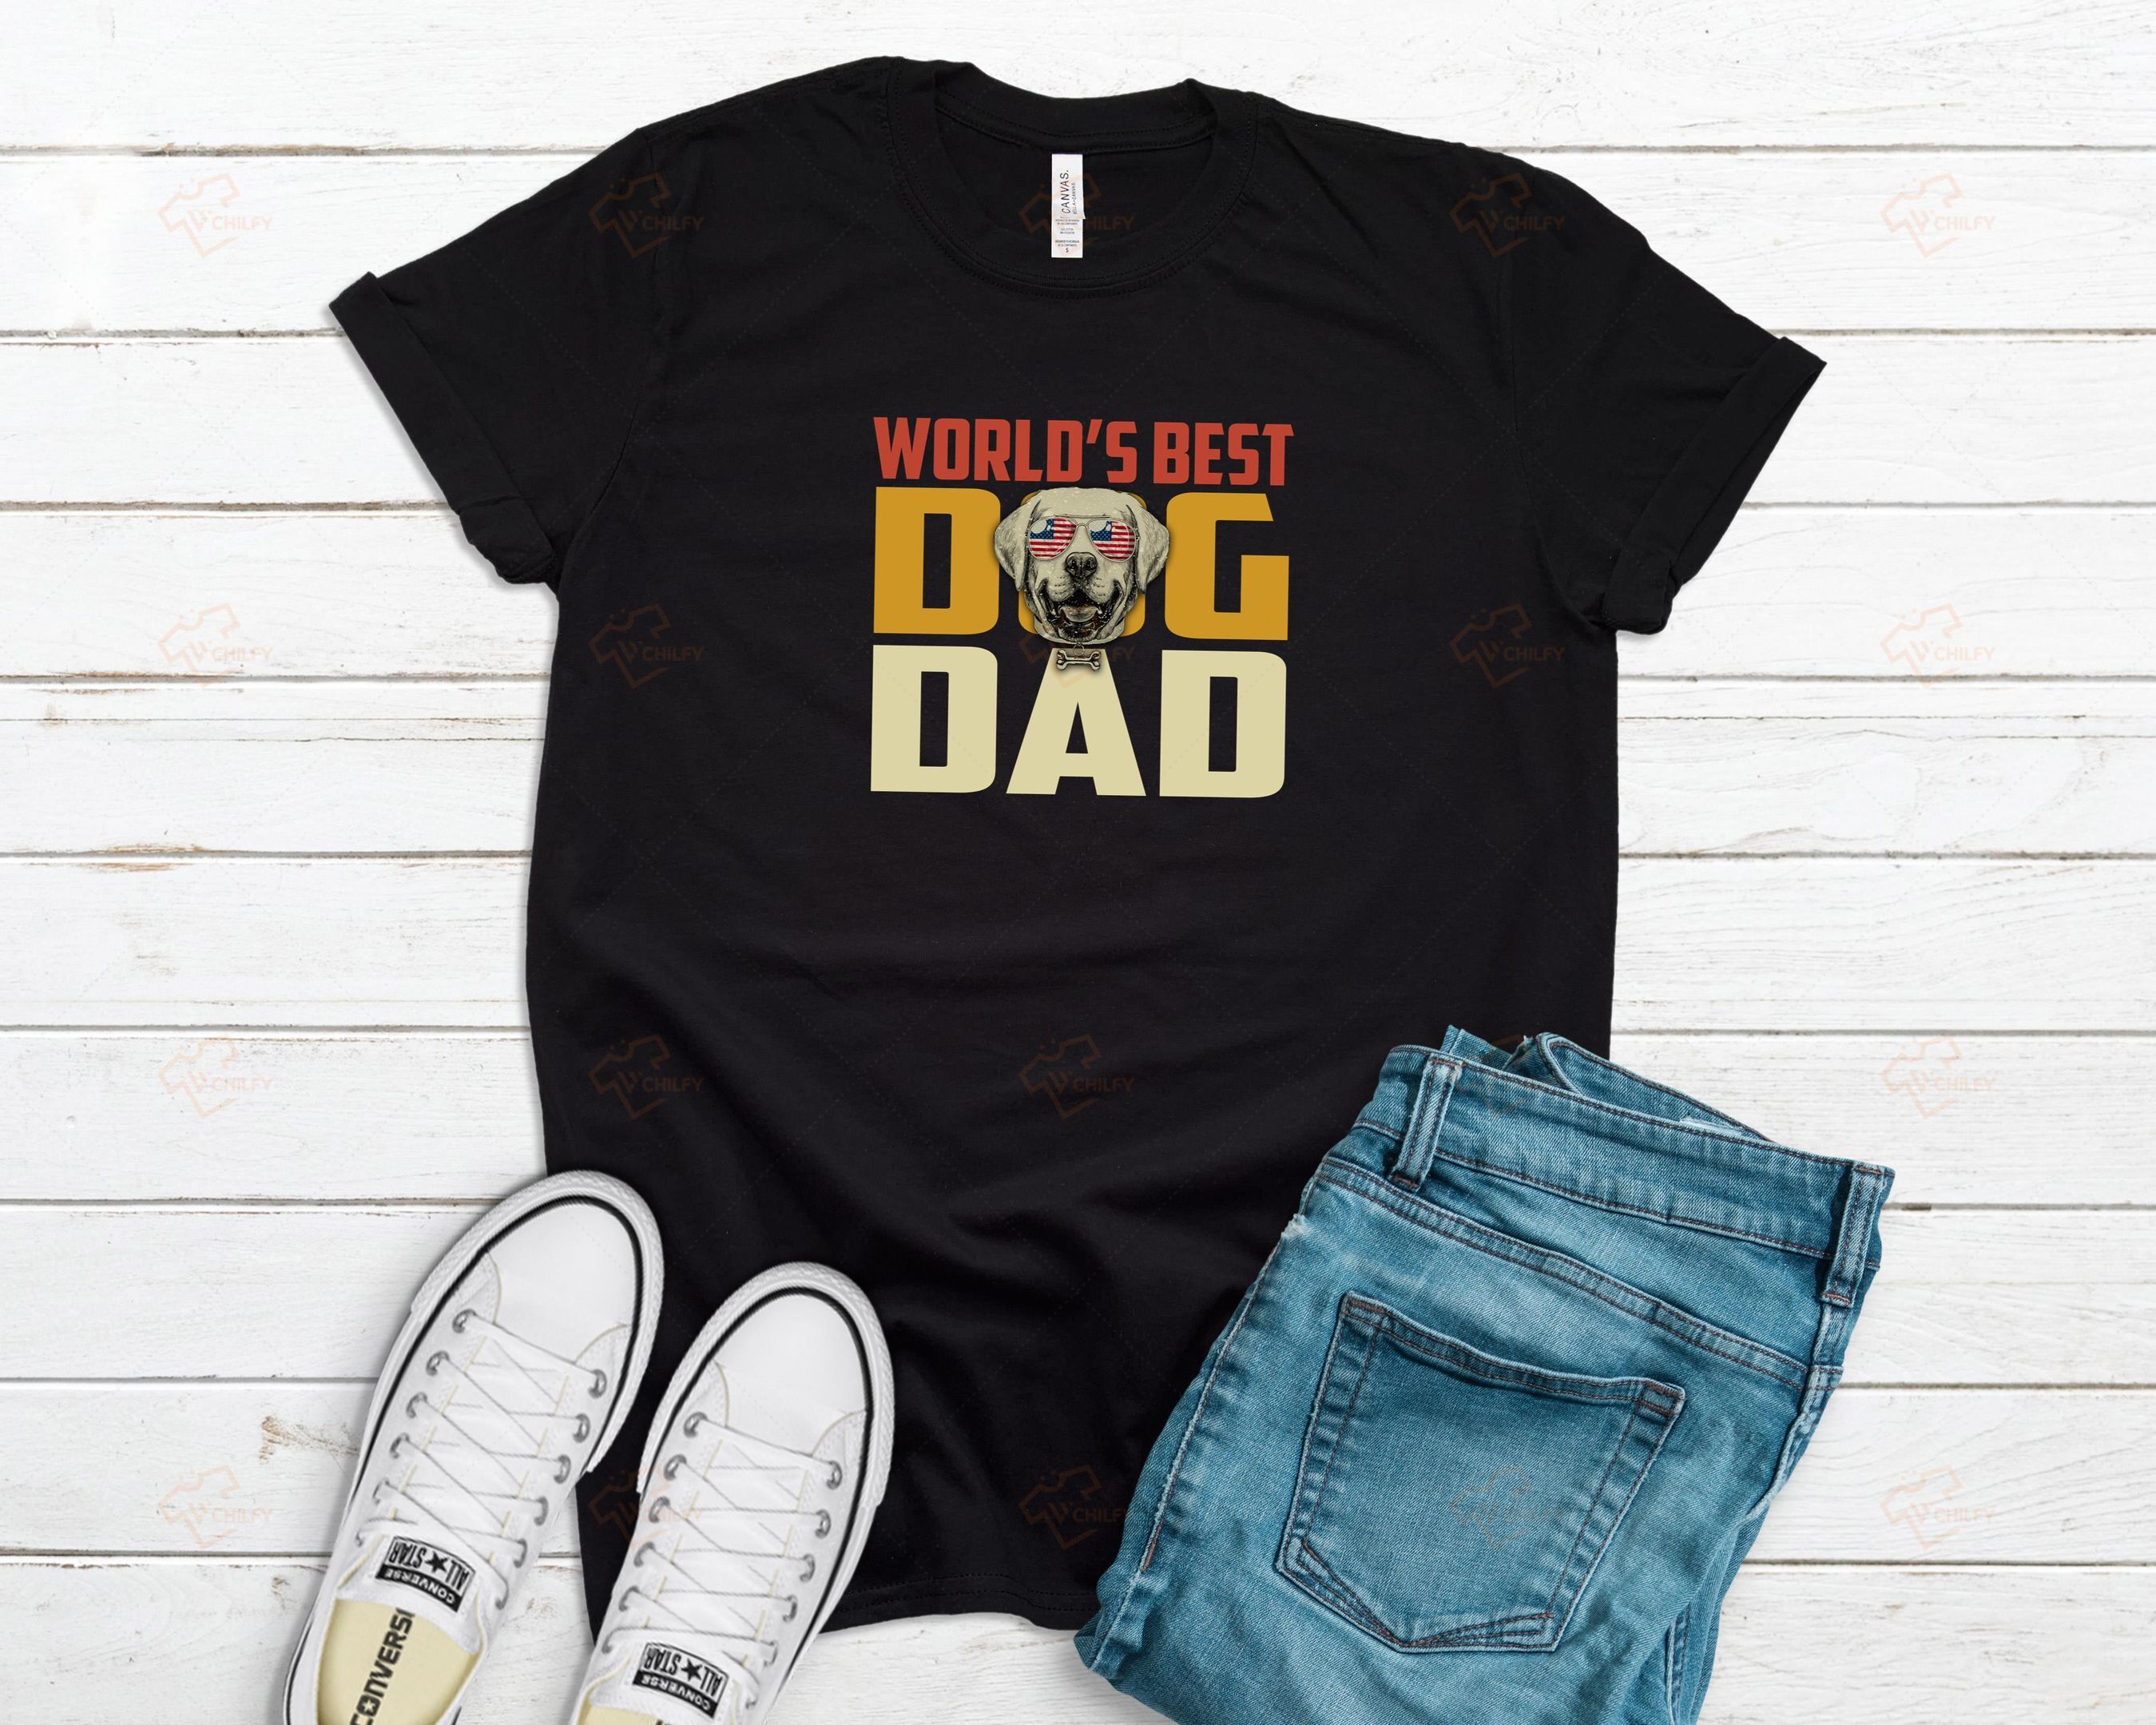 Retriever World’s Best Dog Dad Shirt, Father’s Day Shirt, Shirt For Dad, Funny Dad Shirt, Dog Dad Shirt, Dad Gifts